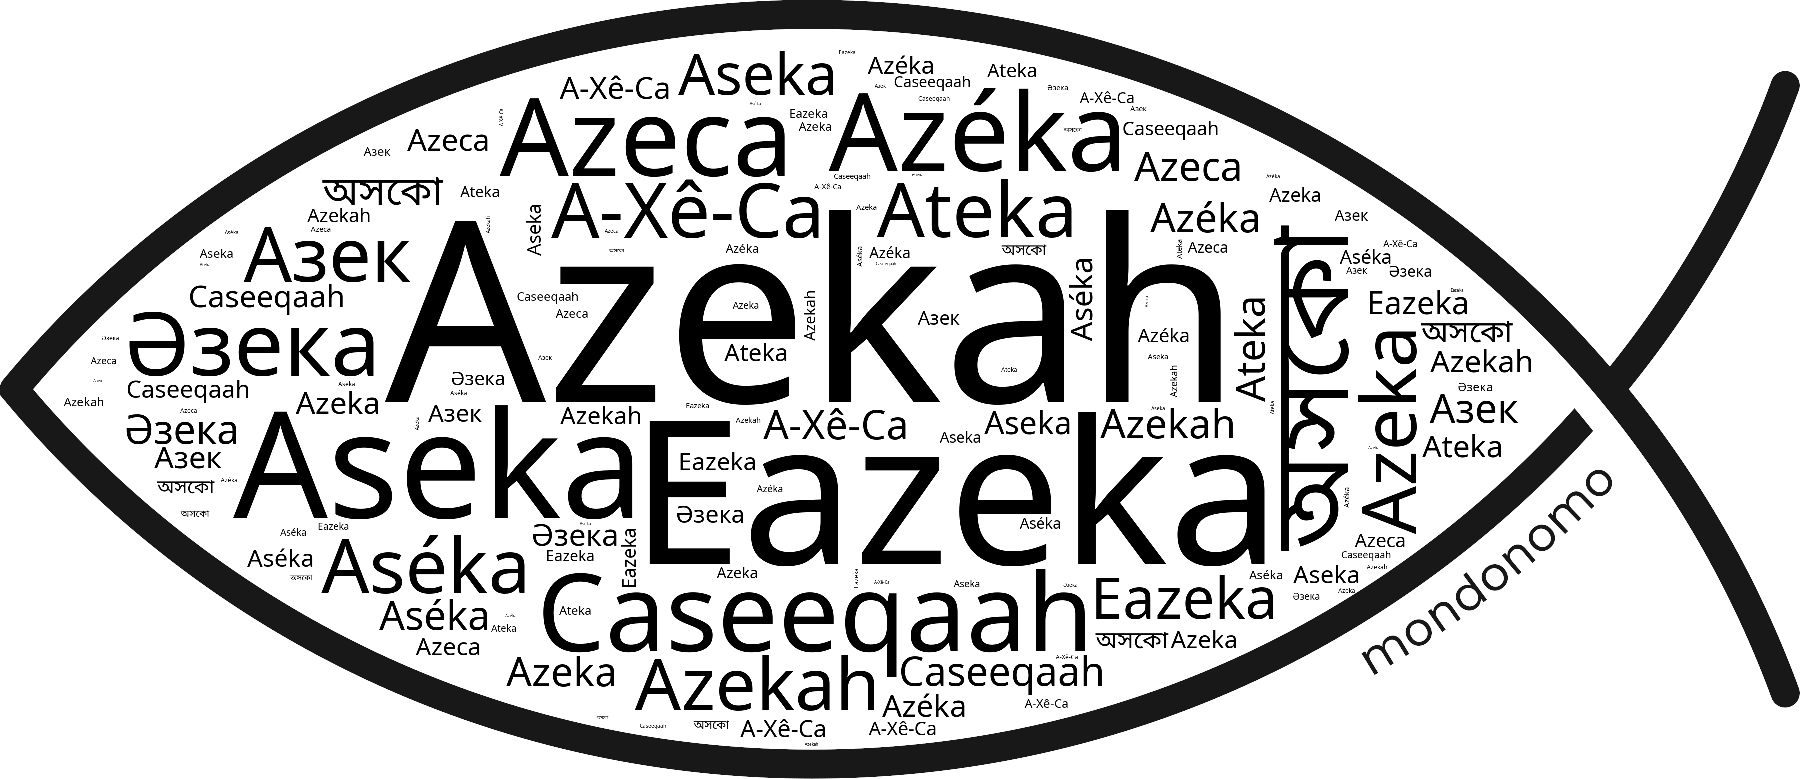 Name Azekah in the world's Bibles